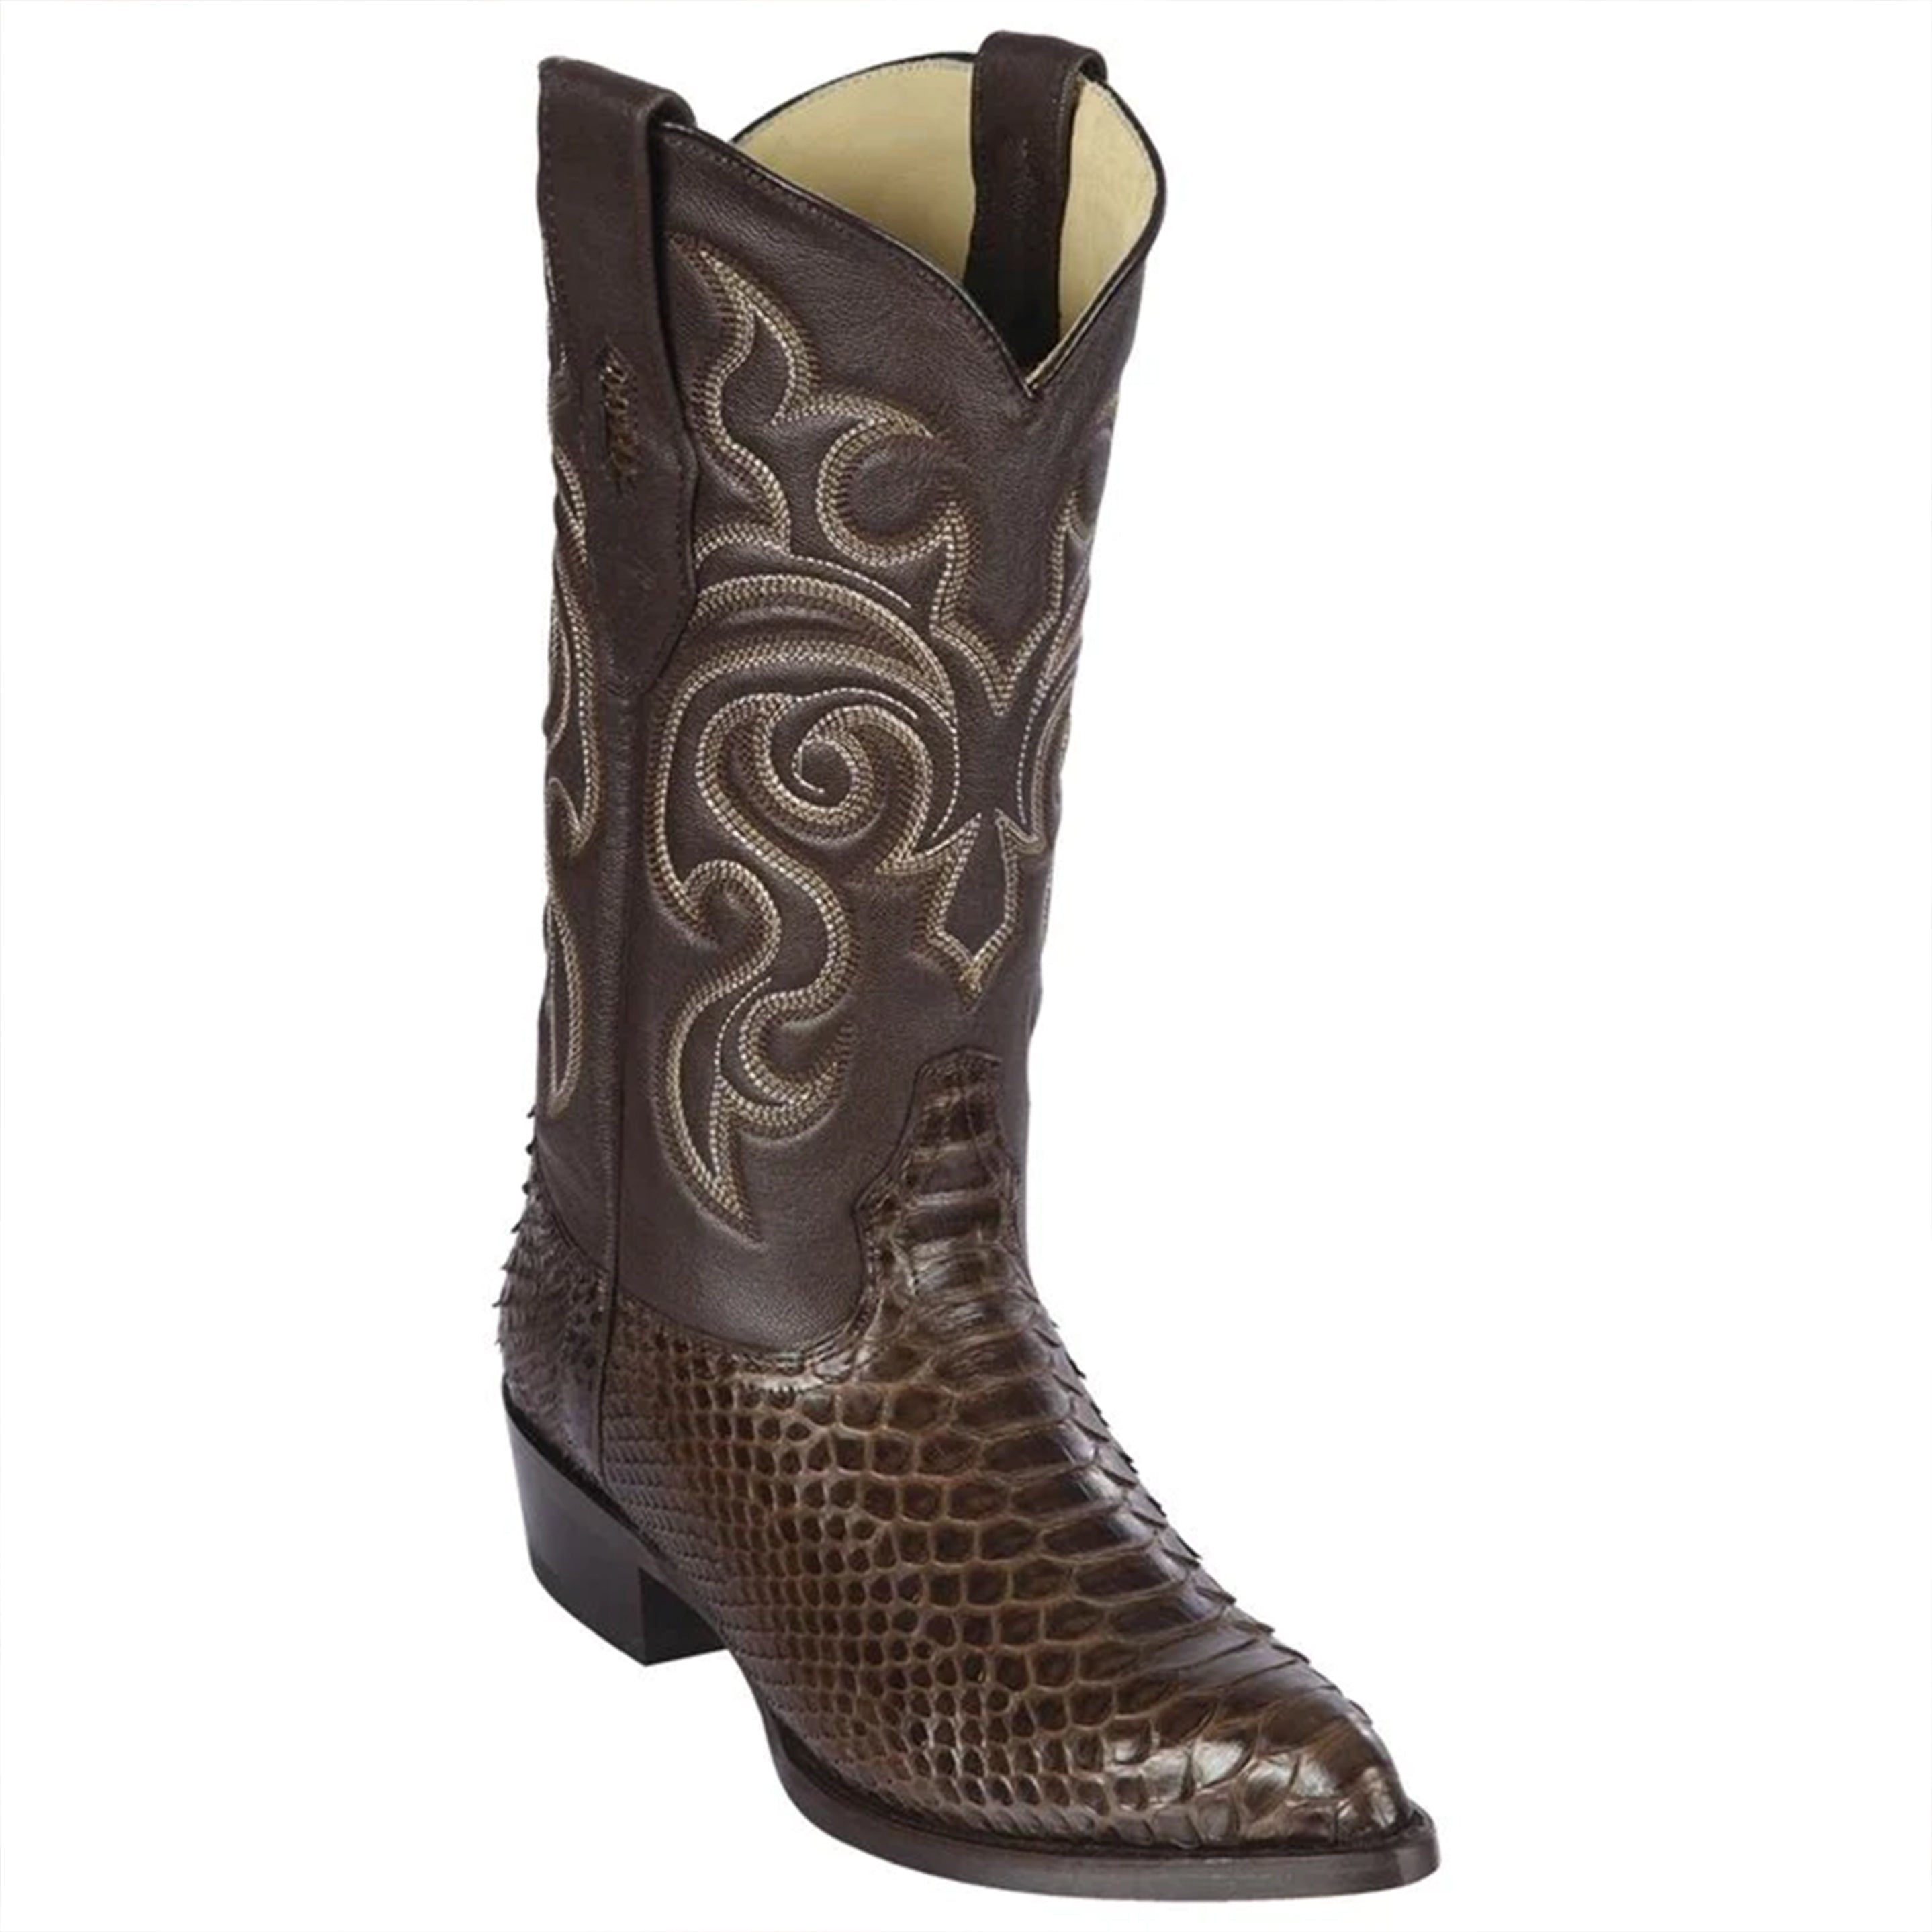 Brown Snakeskin Boots J-Toe - Los Altos Boots